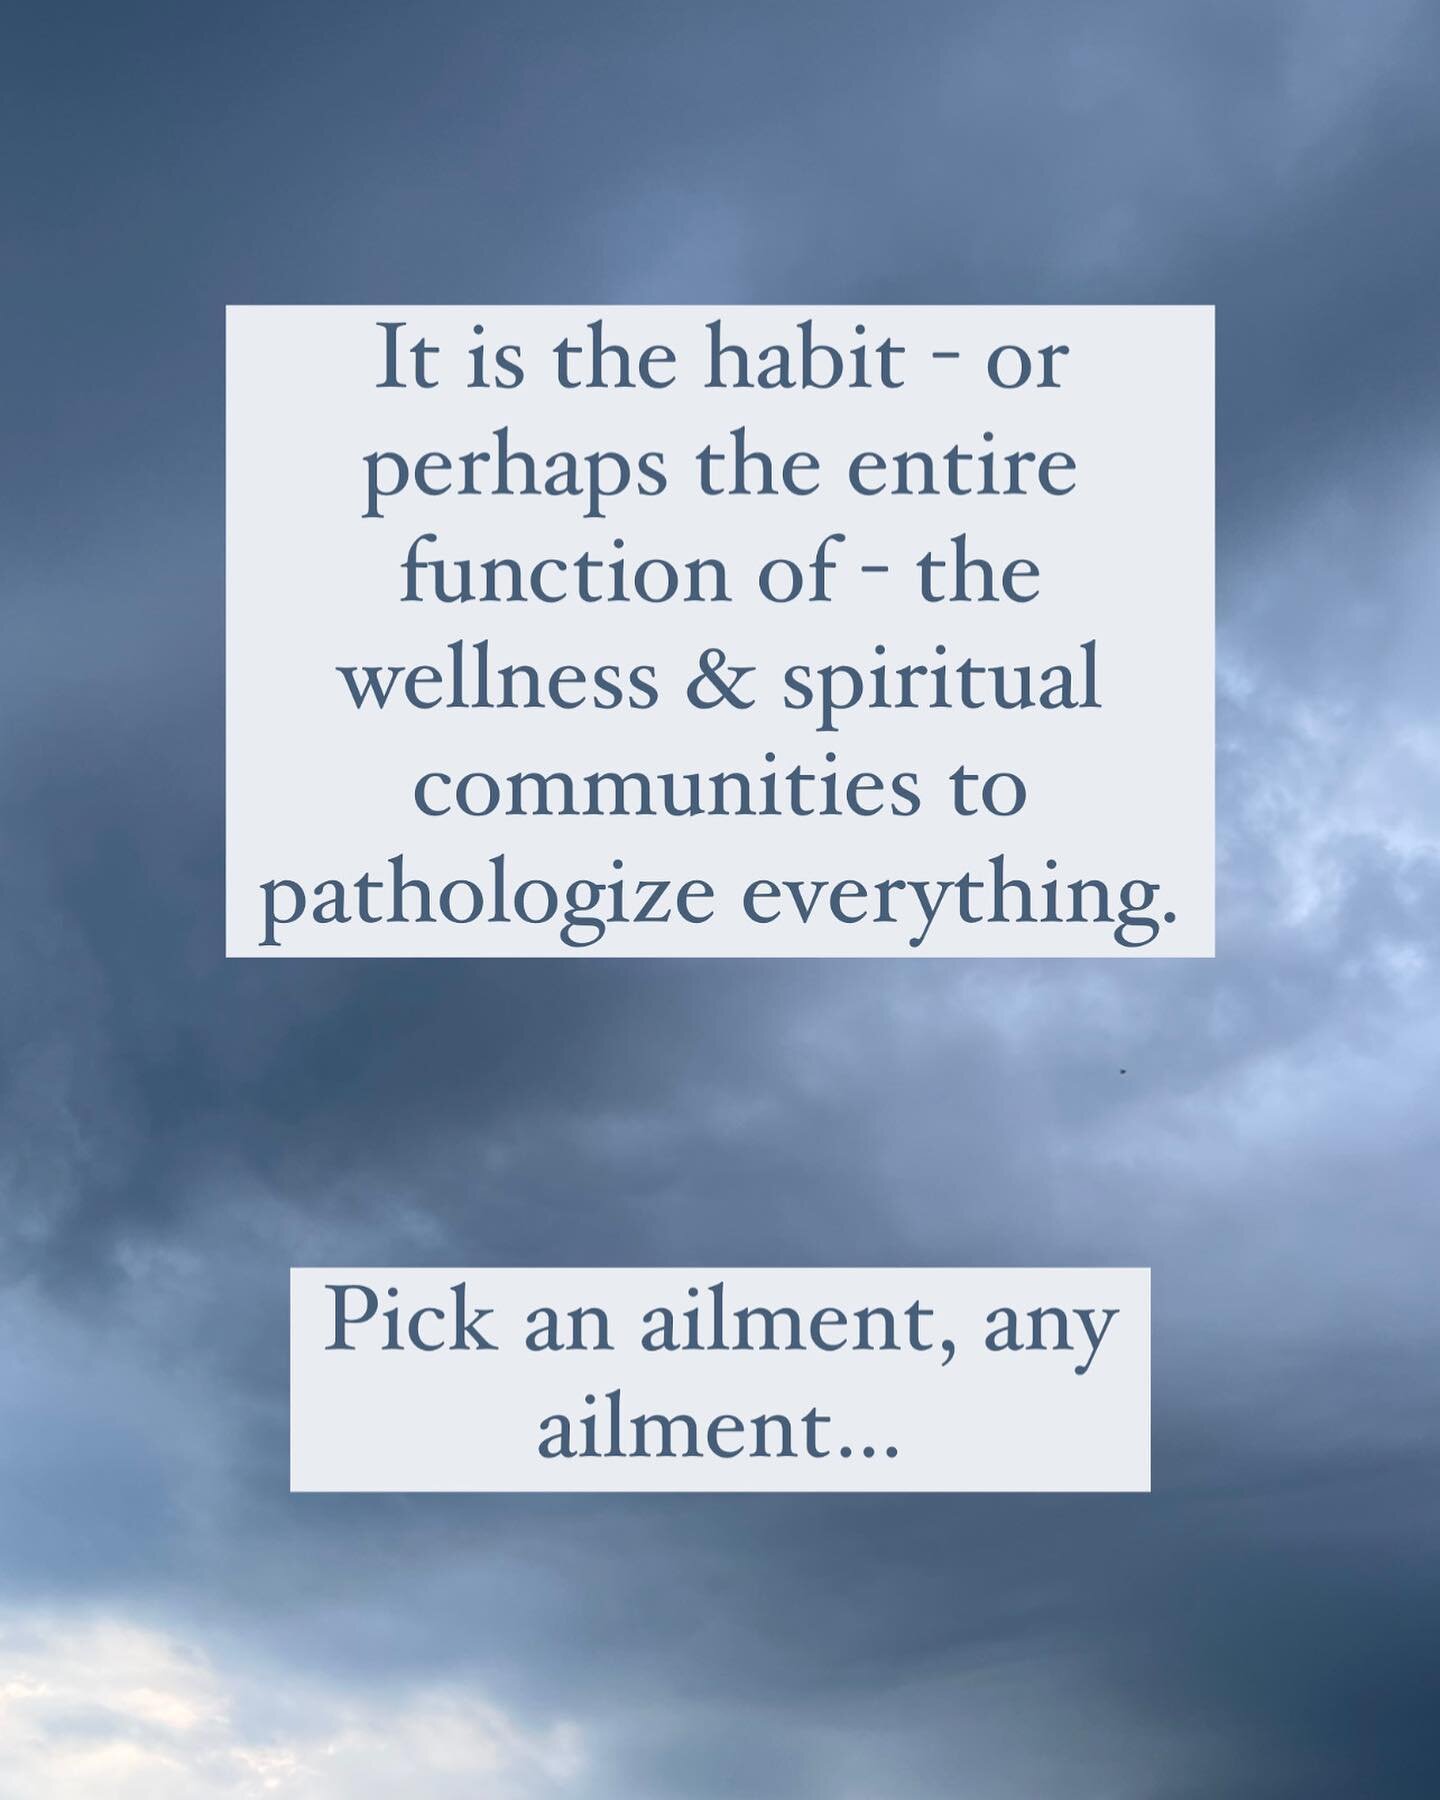 Some thoughts on the pattern of pathologizing everything that happens often in the holistic and spiritual communities ☁️

#holistichealing #holistichealth #conspirituality #healingmentality